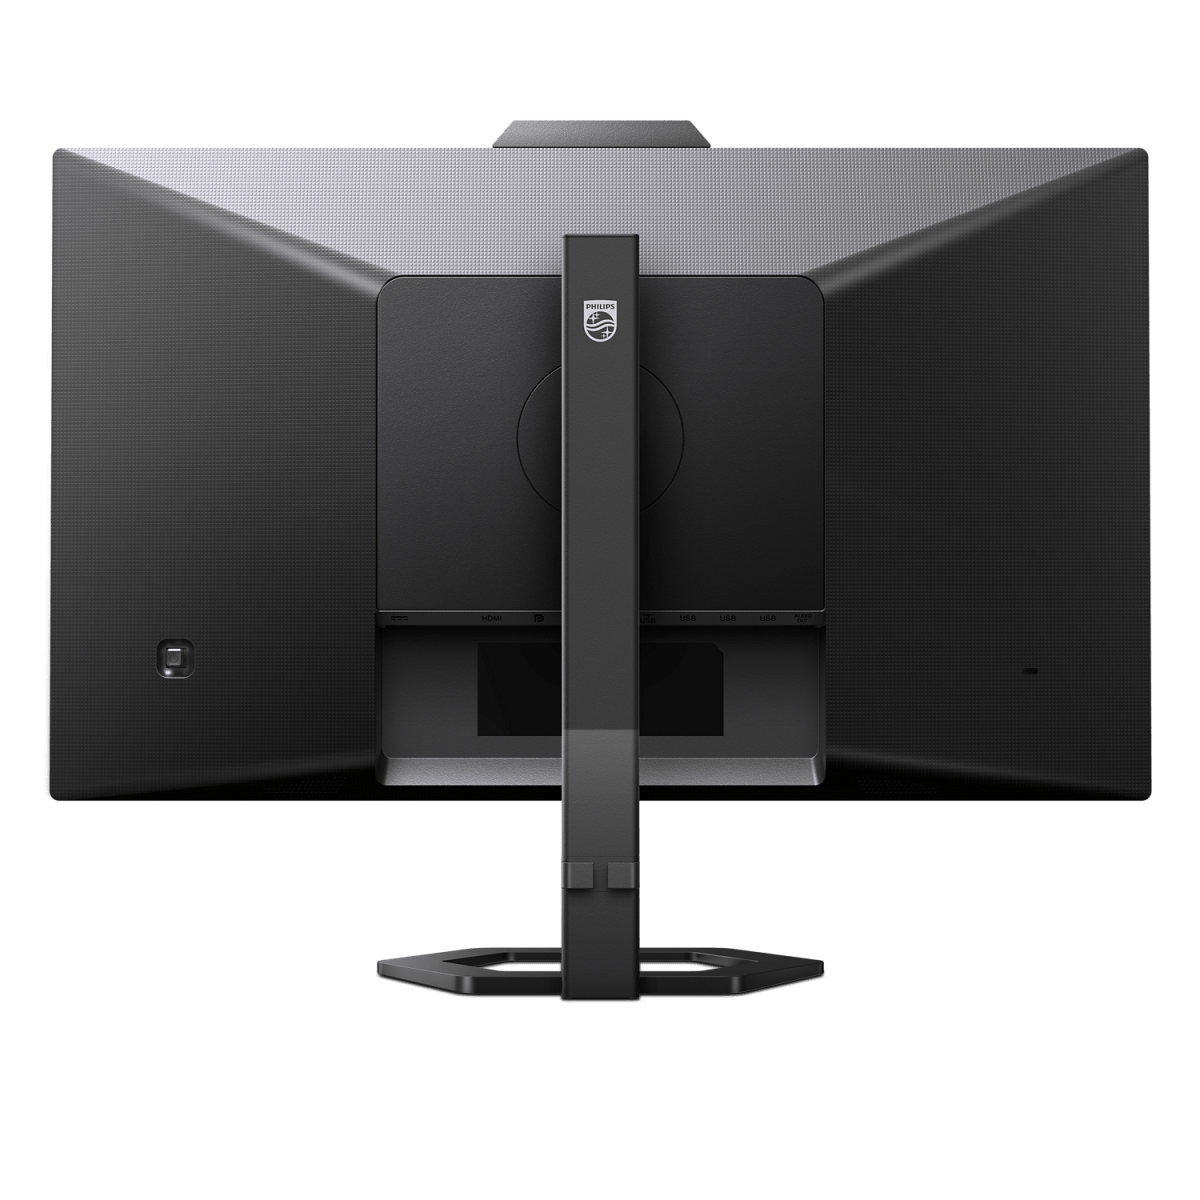 Philips Monitors: launches two new multifunctional models